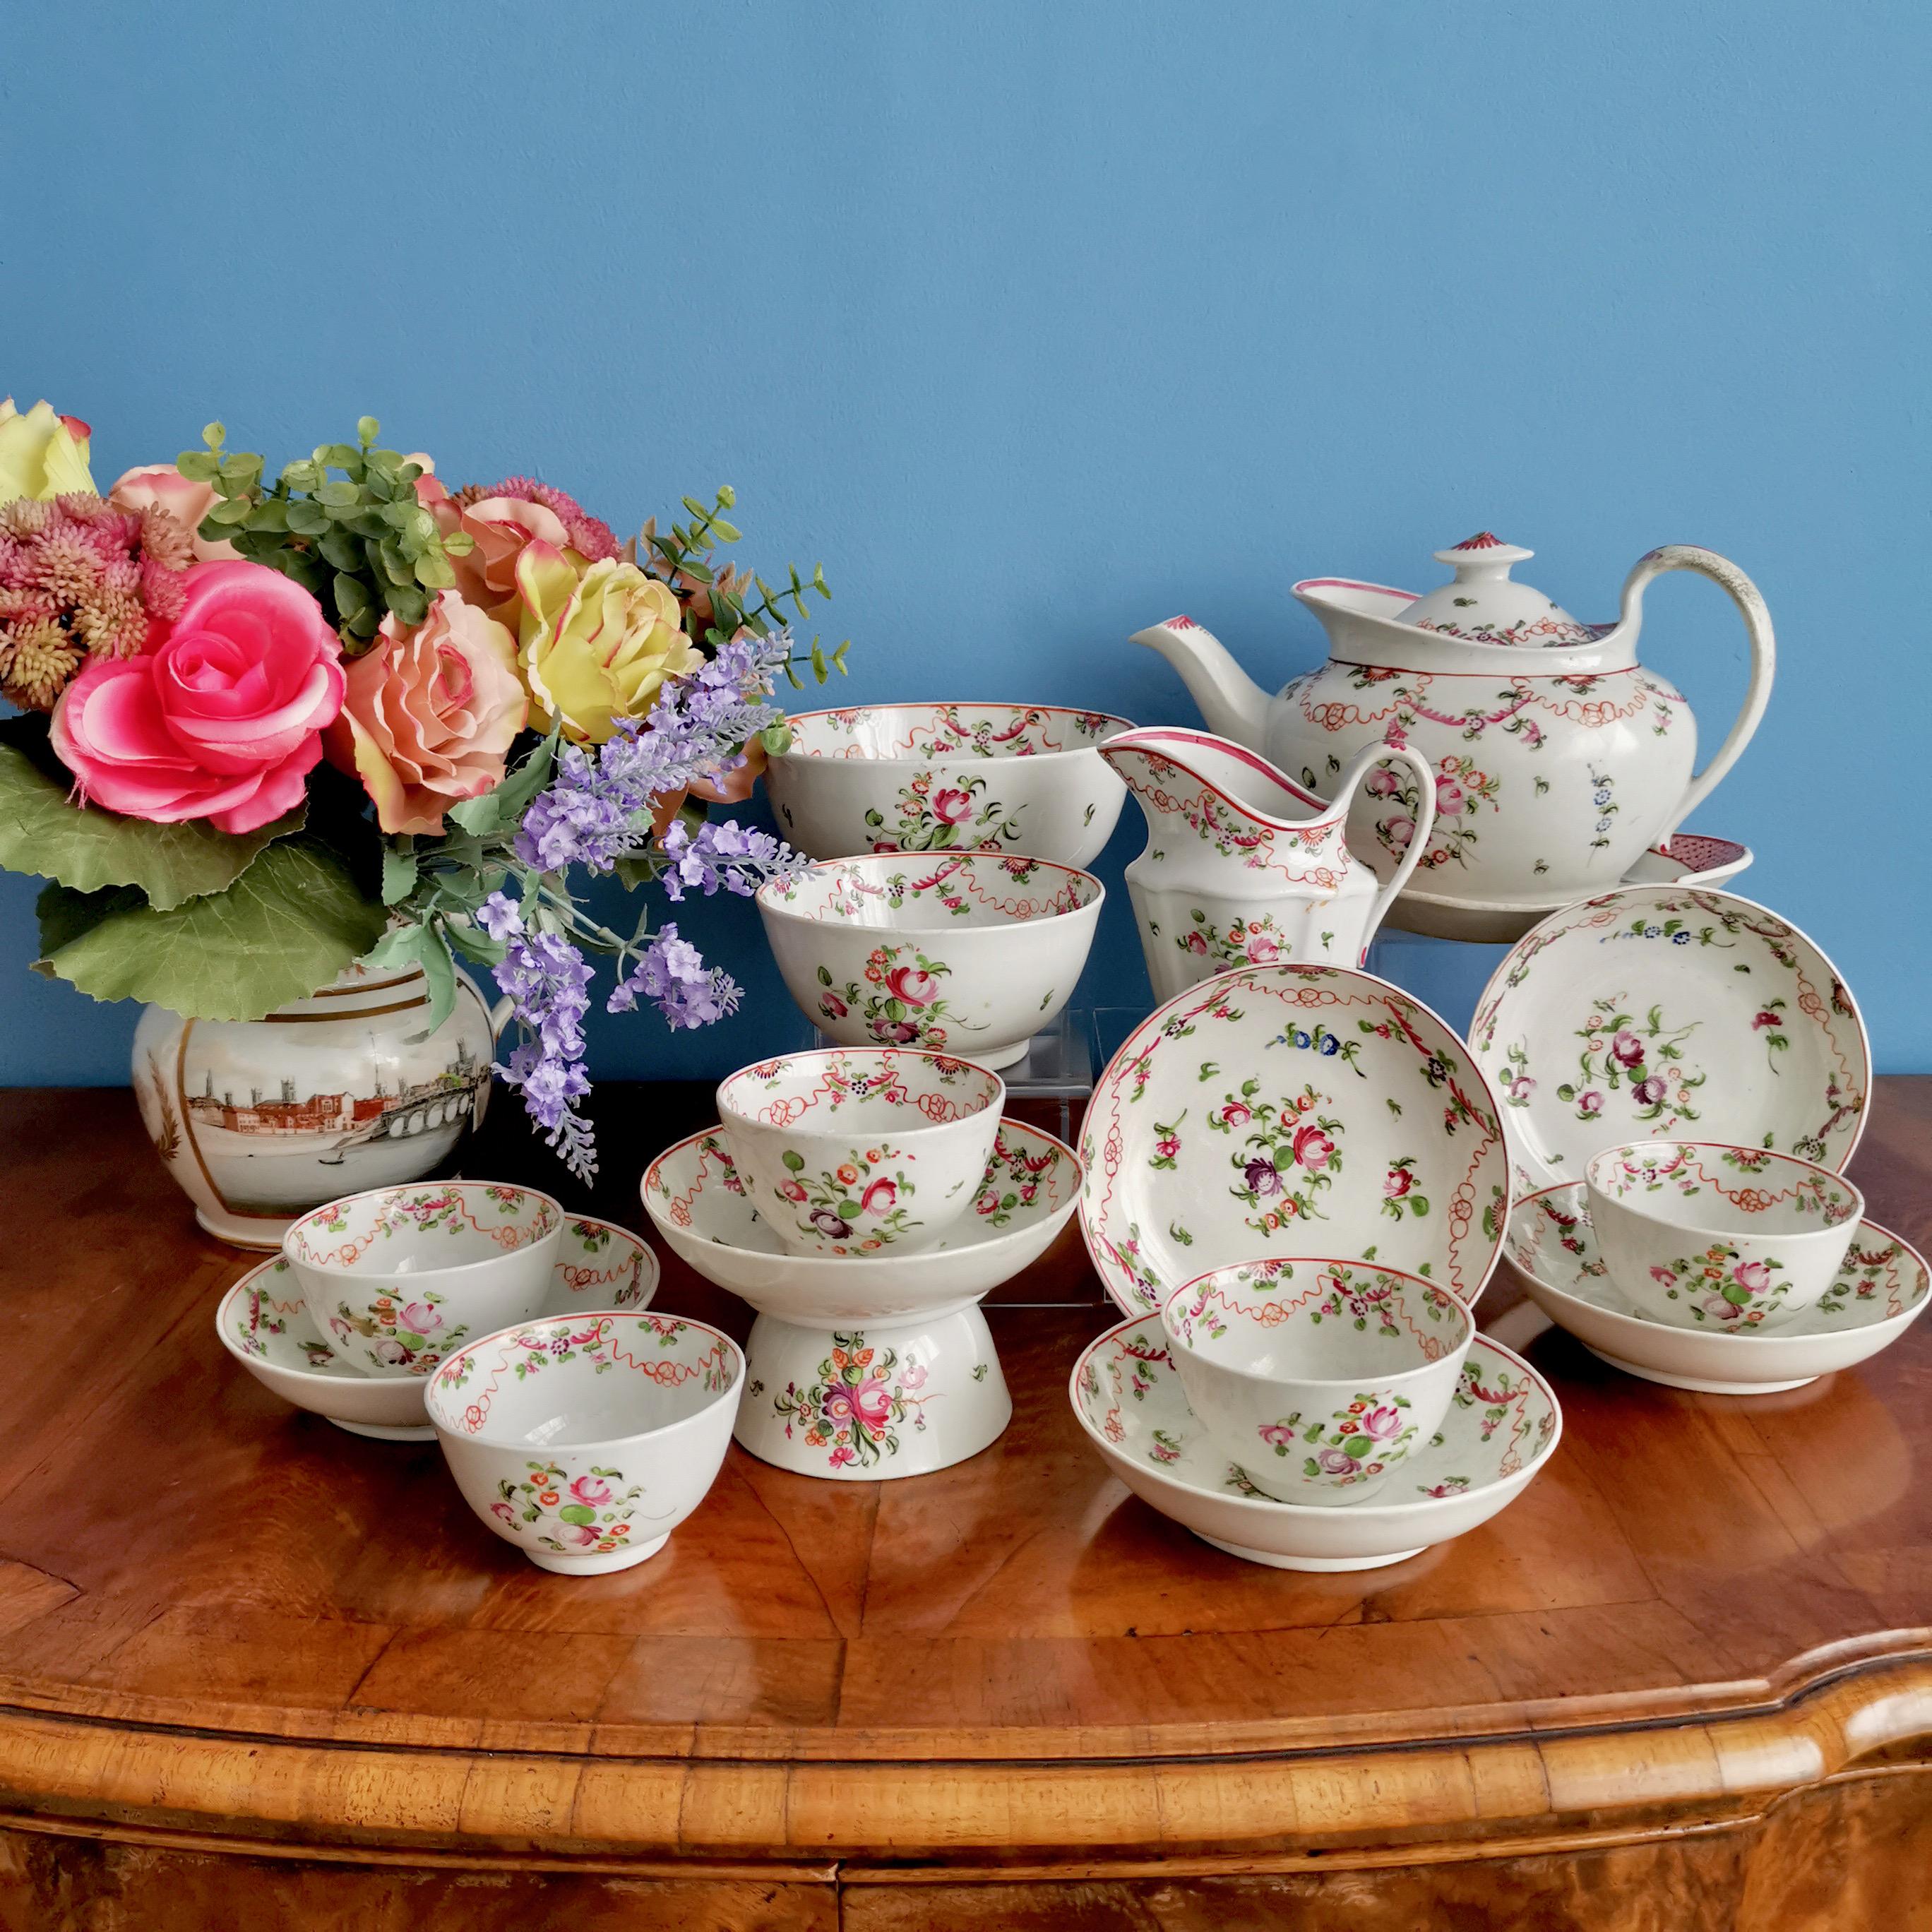 This is a beautiful and very charming tea service made by New Hall in circa 1795. Although the teapot is from a bit later (circa 1810). The service is made of hybrid hard paste porcelain and decorated in the famous 